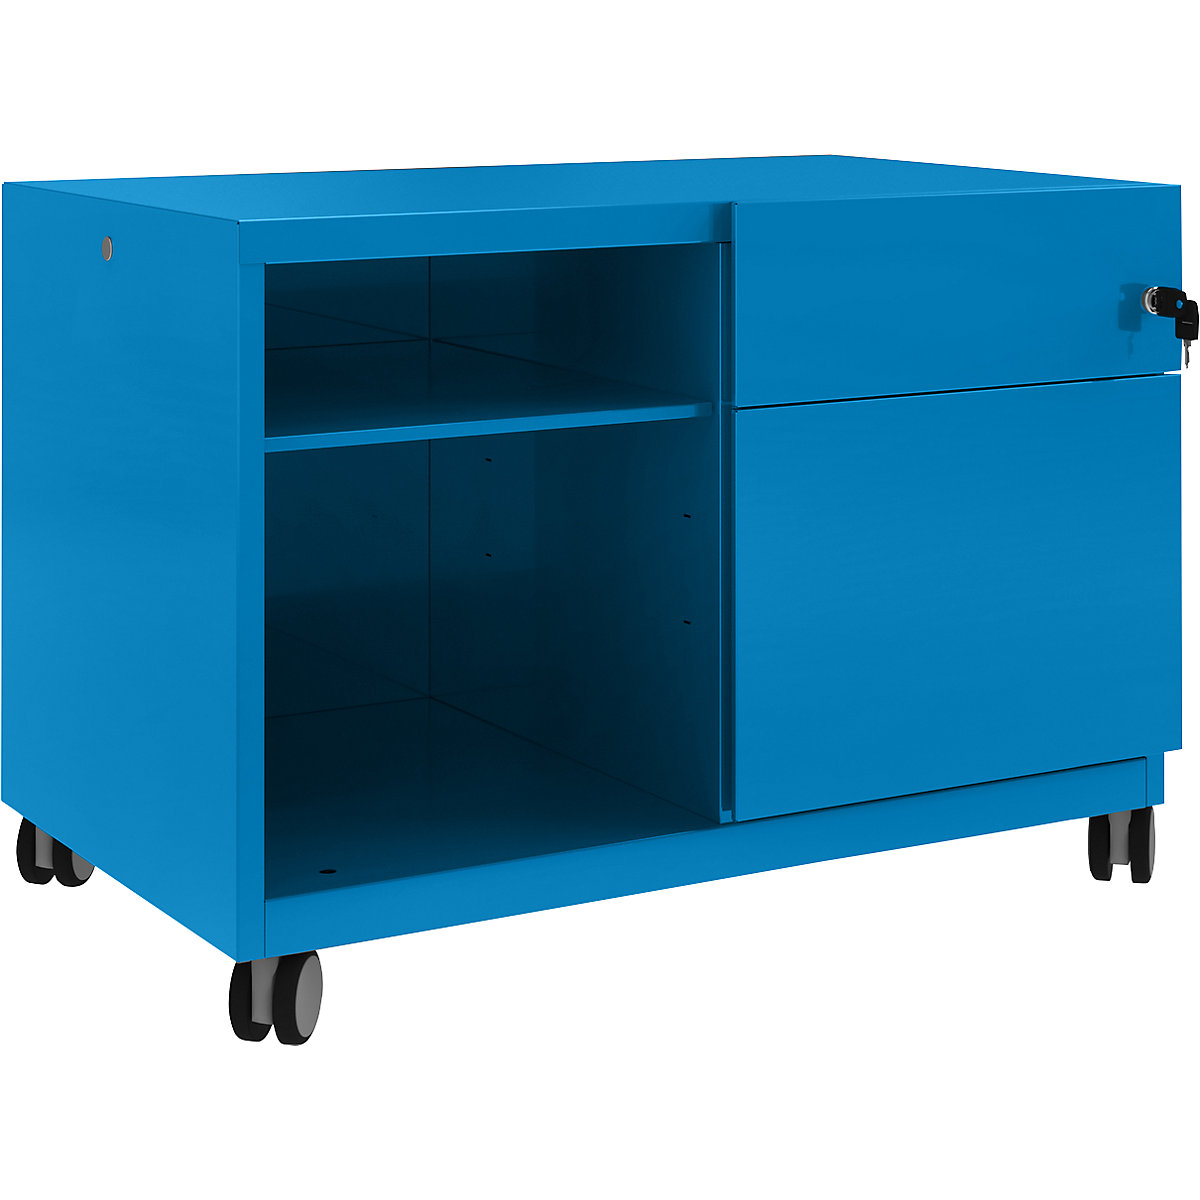 Note™ CADDY, HxBxT 563 x 800 x 490 mm – BISLEY, 1 universal drawer and suspension file drawer on the right, blue-23